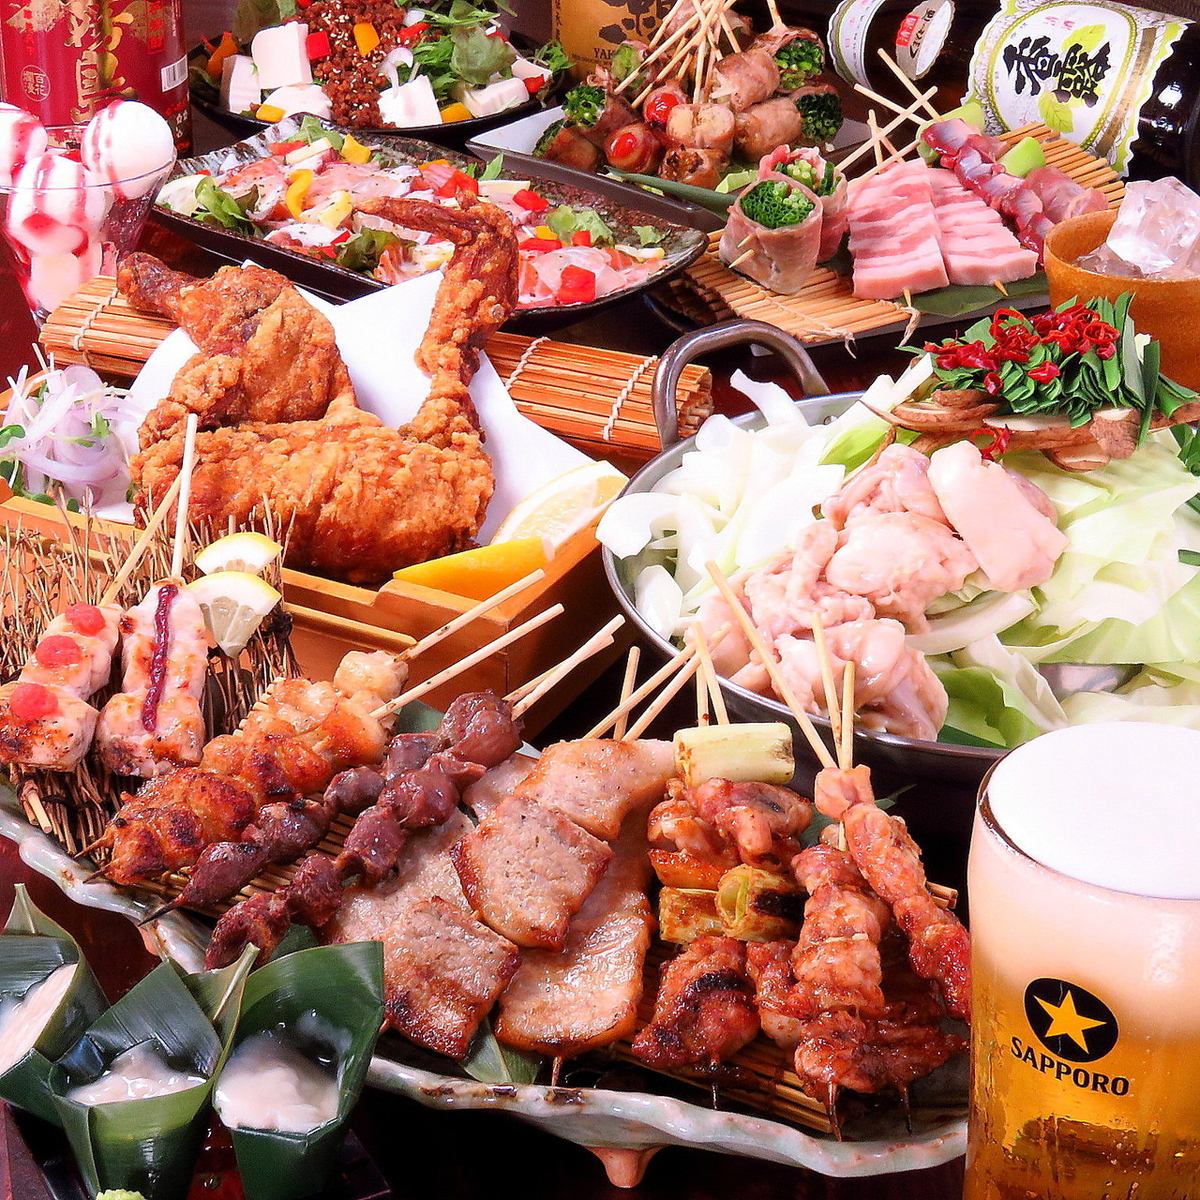 Toraichi special course ★ You can choose from 4 types of hot pot / 8 dishes including our specialty skewers + 120 minutes [all-you-can-drink] ⇒ 4000 yen